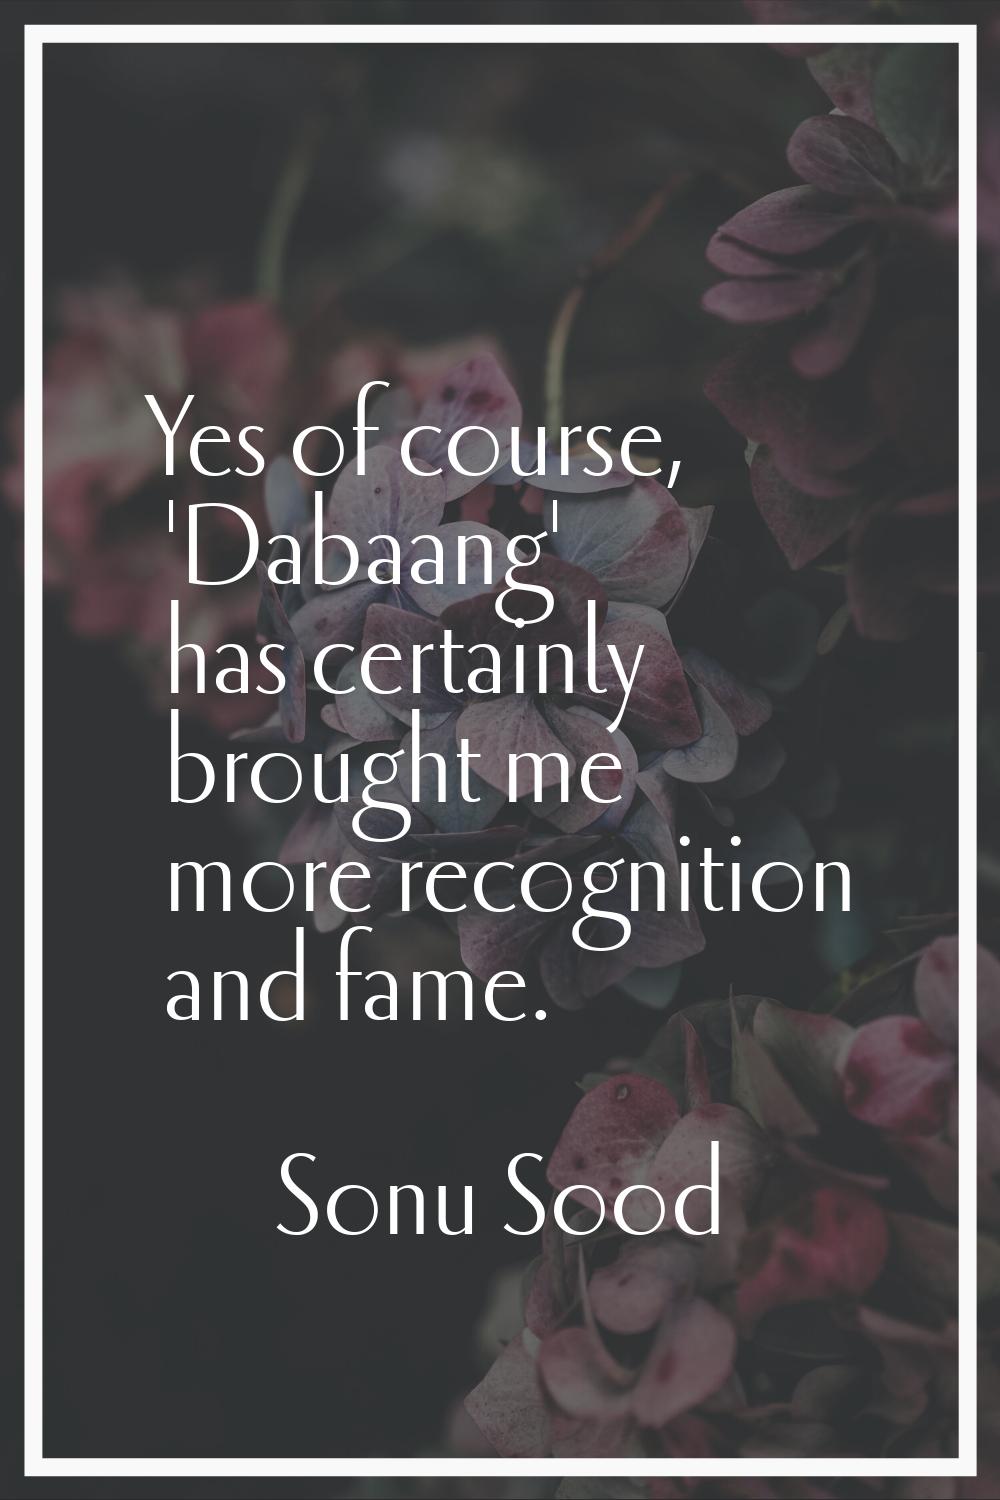 Yes of course, 'Dabaang' has certainly brought me more recognition and fame.